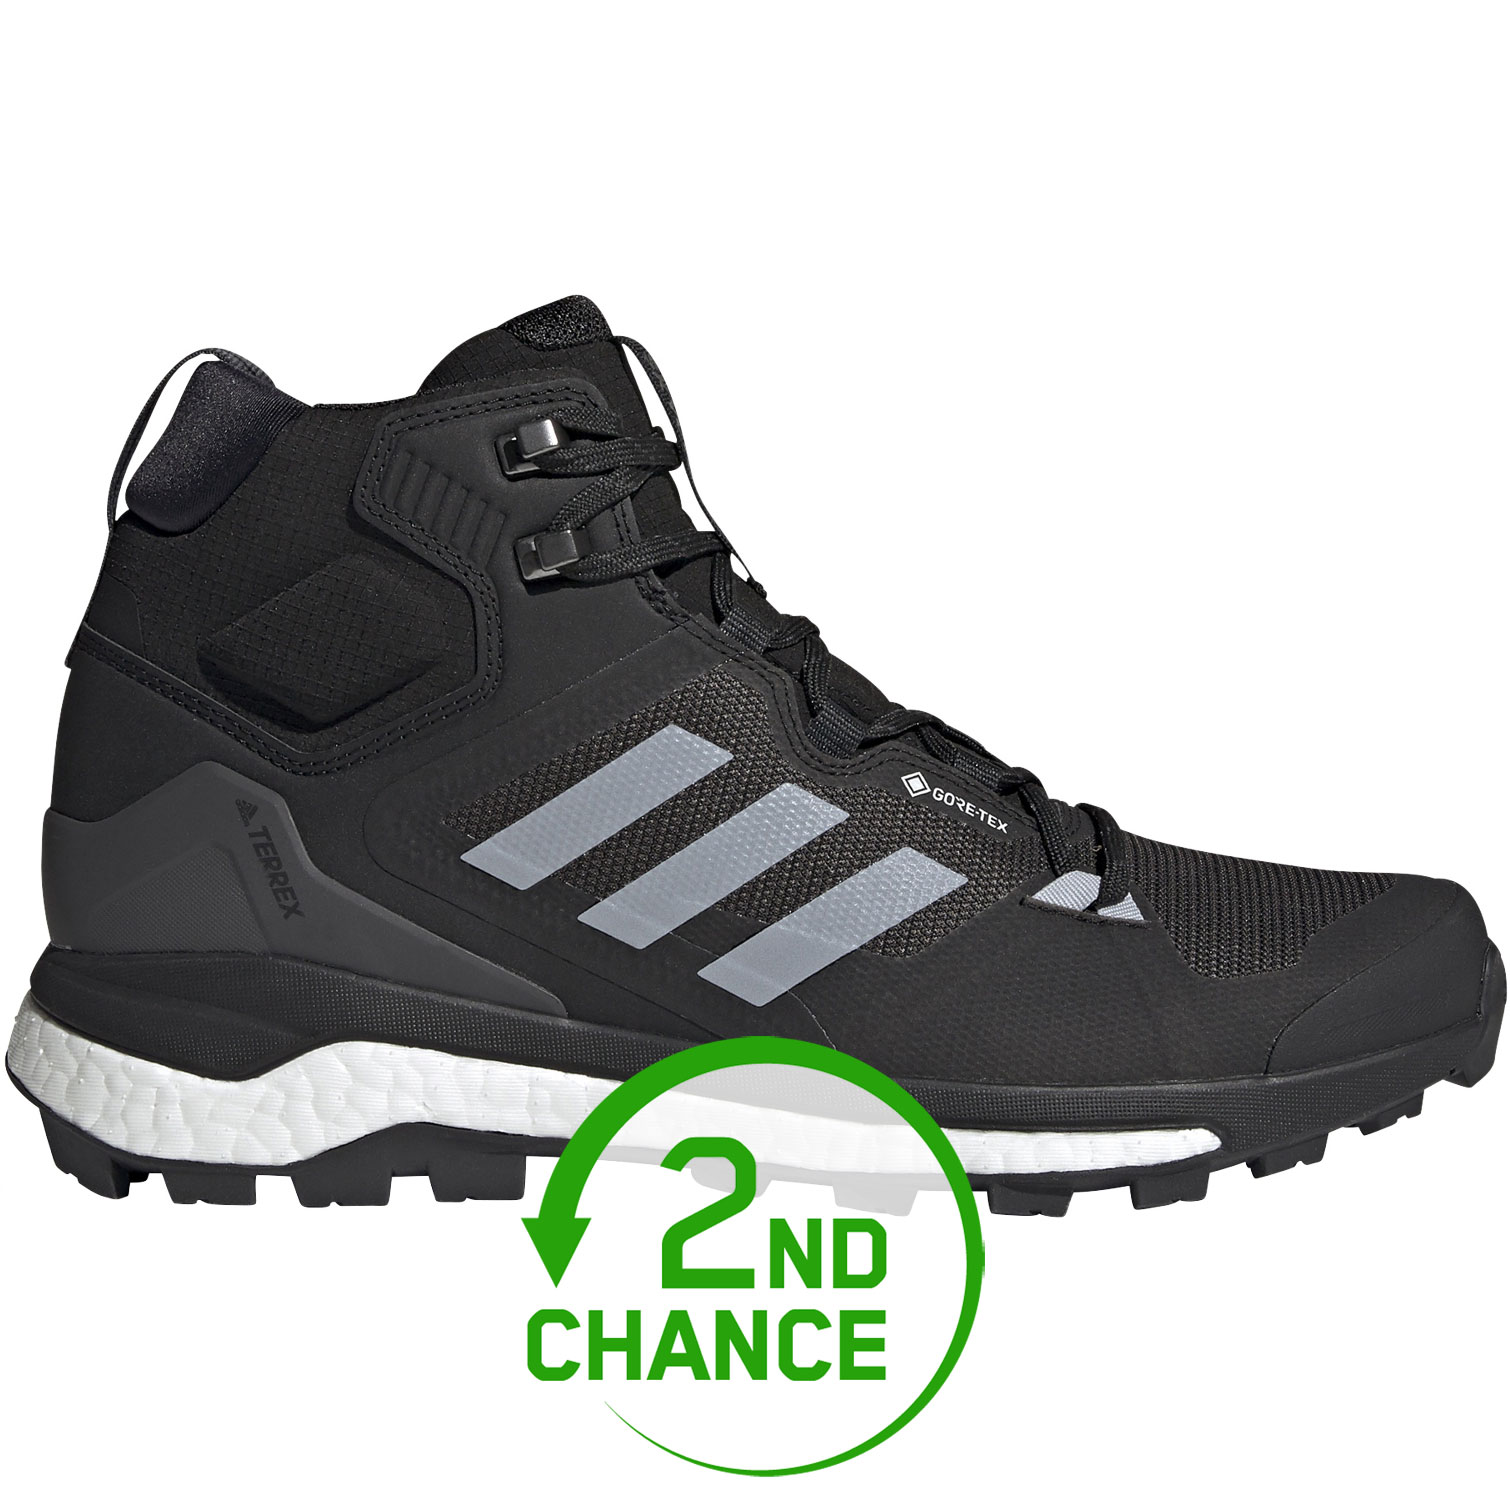 adidas TERREX Skychaser 2.0 Mid GORE-TEX Hiking Shoes Men - core black/halo  silver/dgh solid grey FZ3332 - 2nd Choice